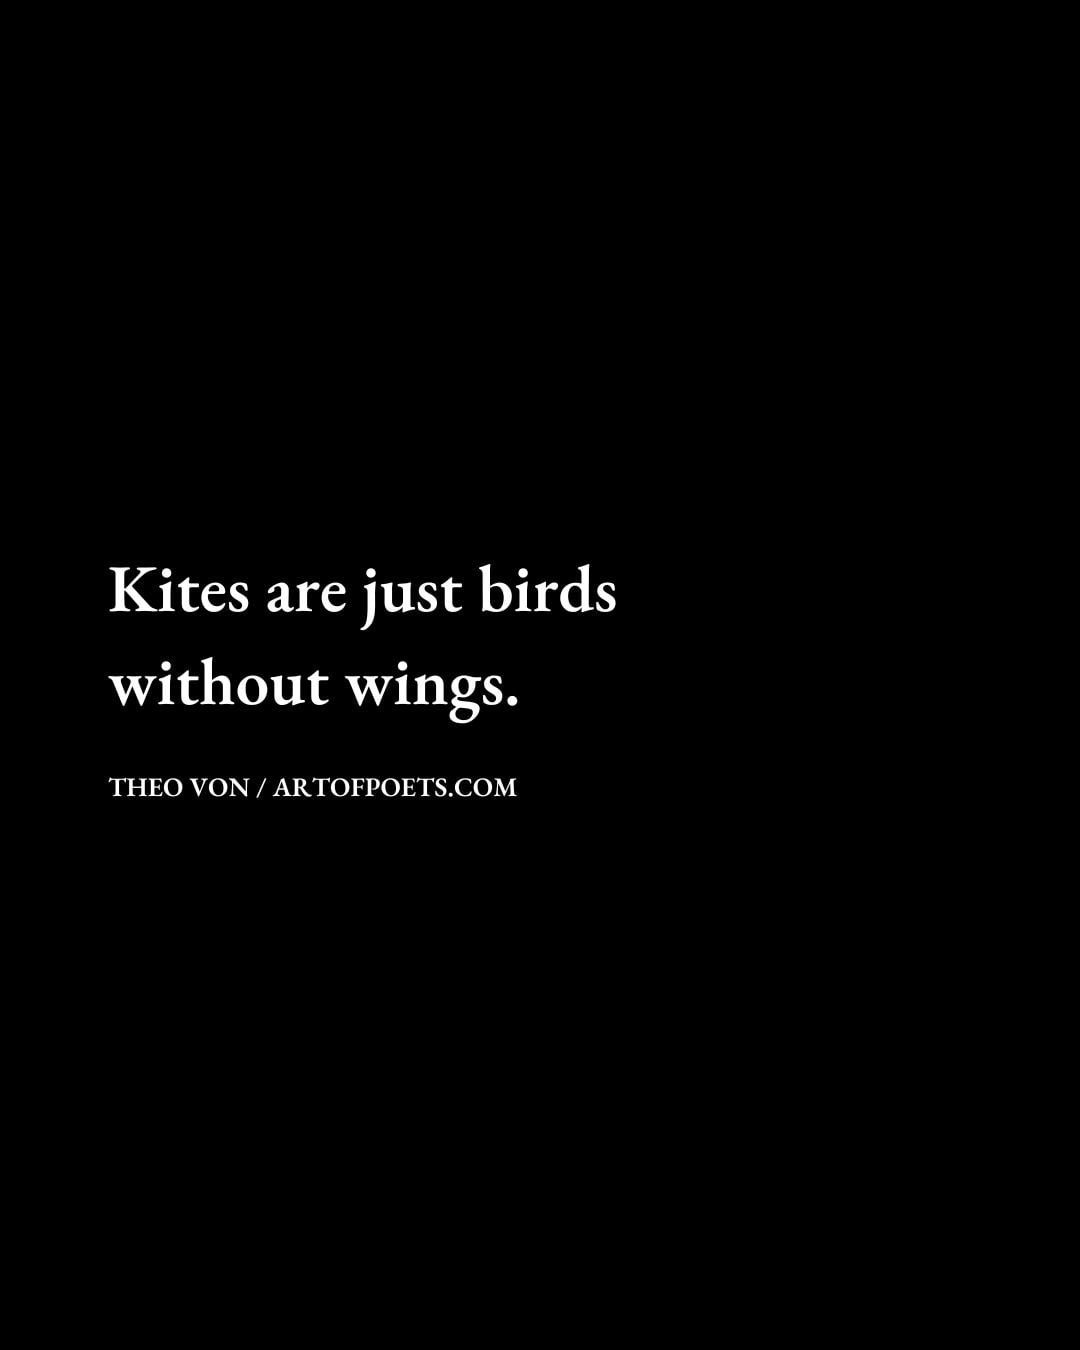 Kites are just birds without wings